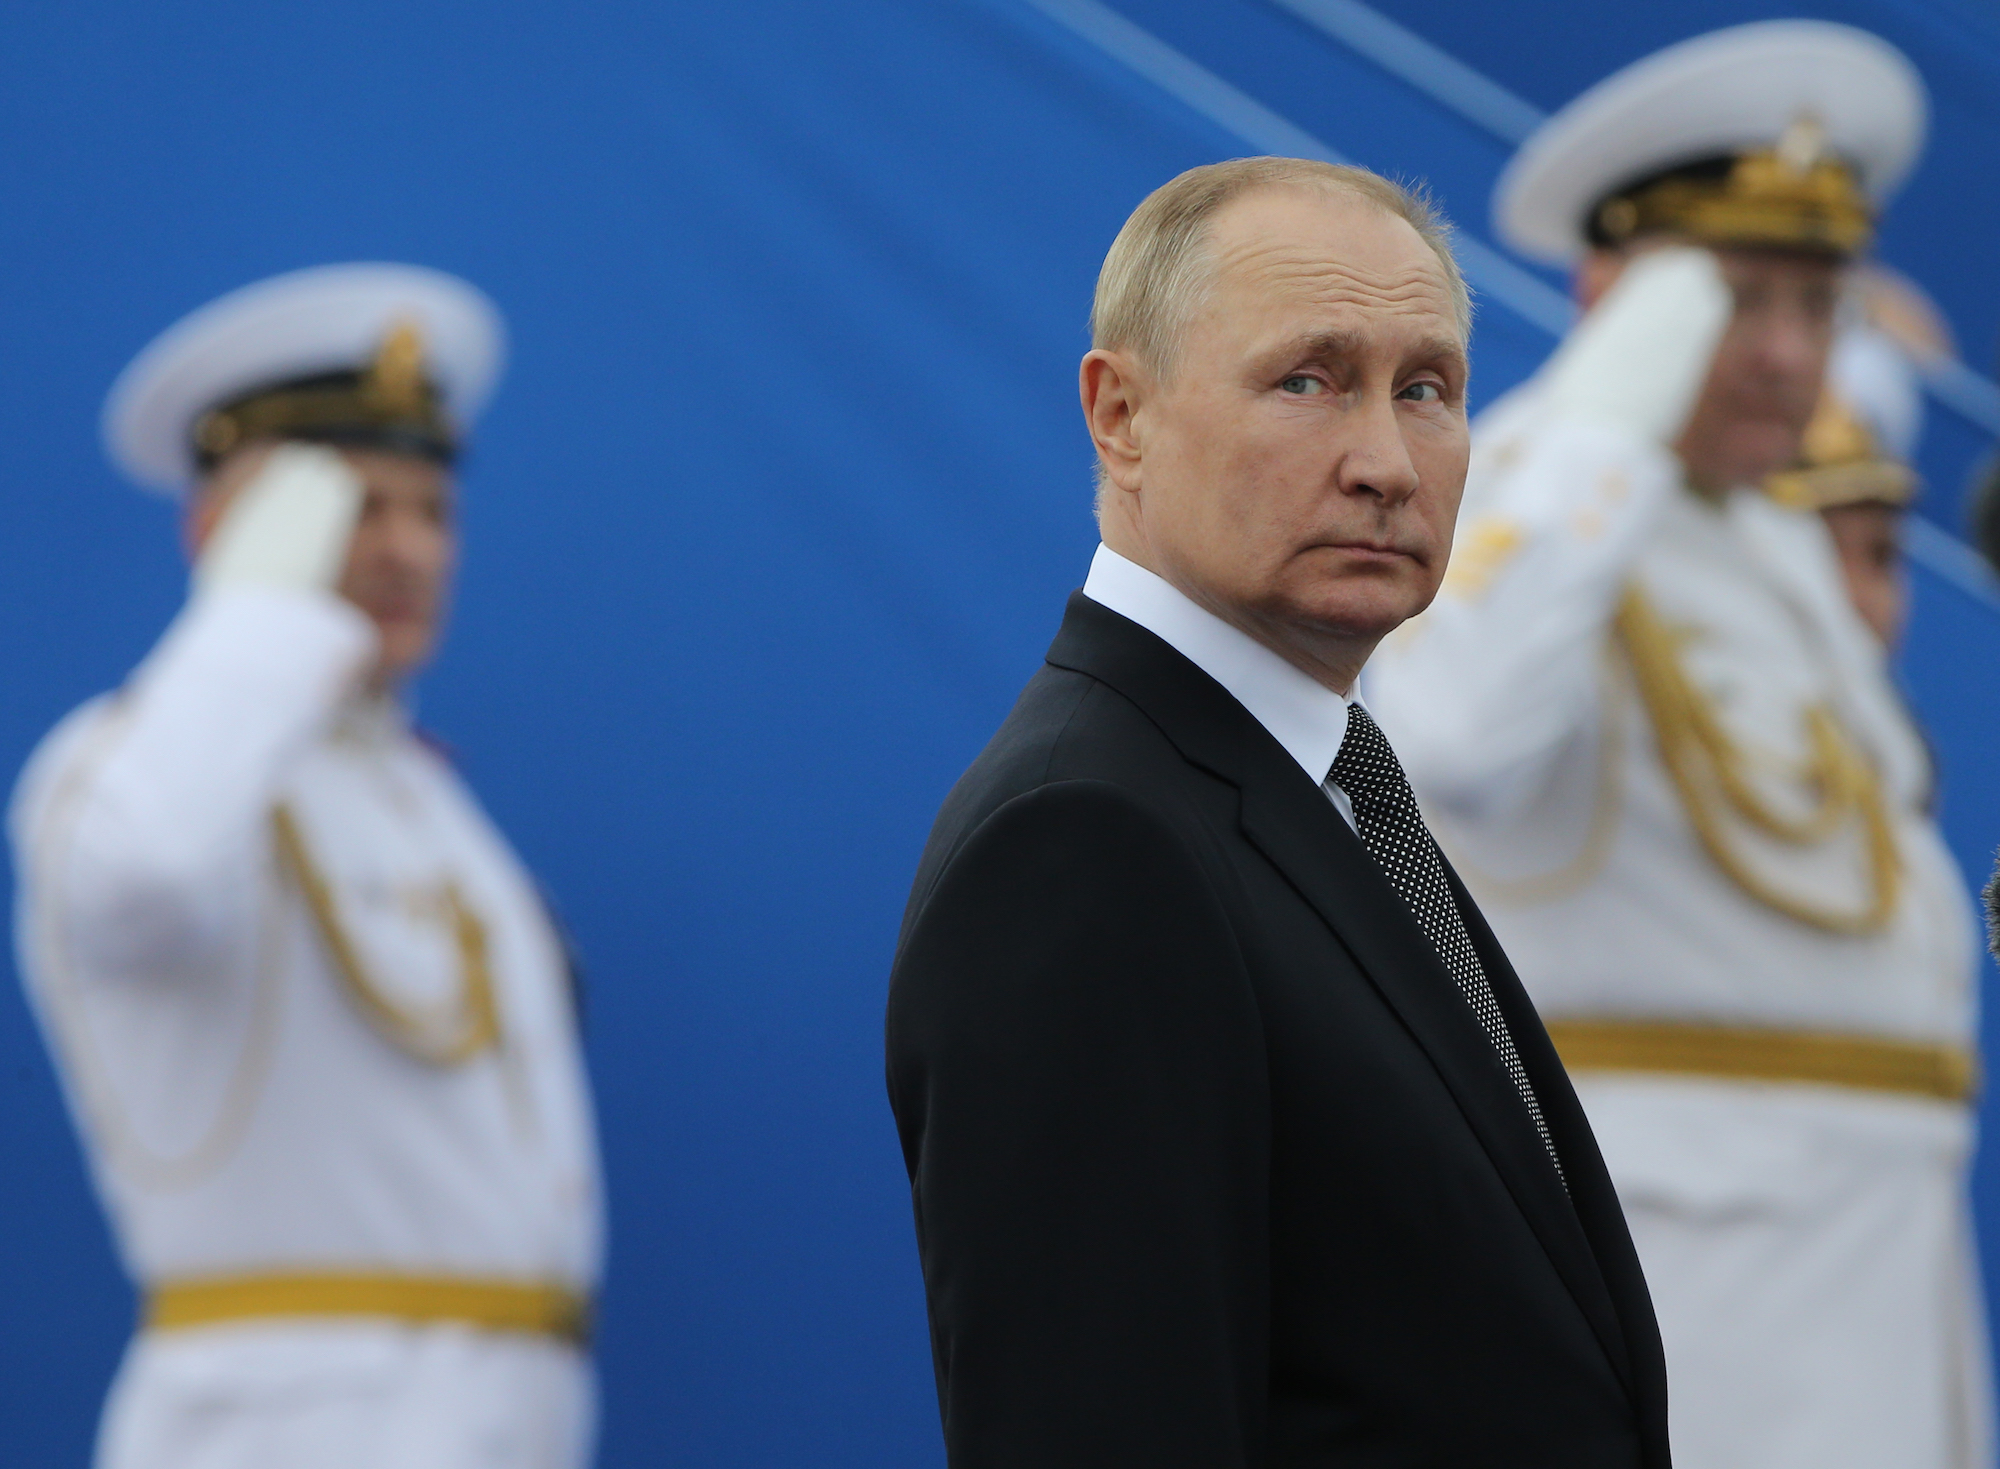 President Vladimir Putin is seen in July 2022, at the Navy Day Parade in Saint Petersburg.